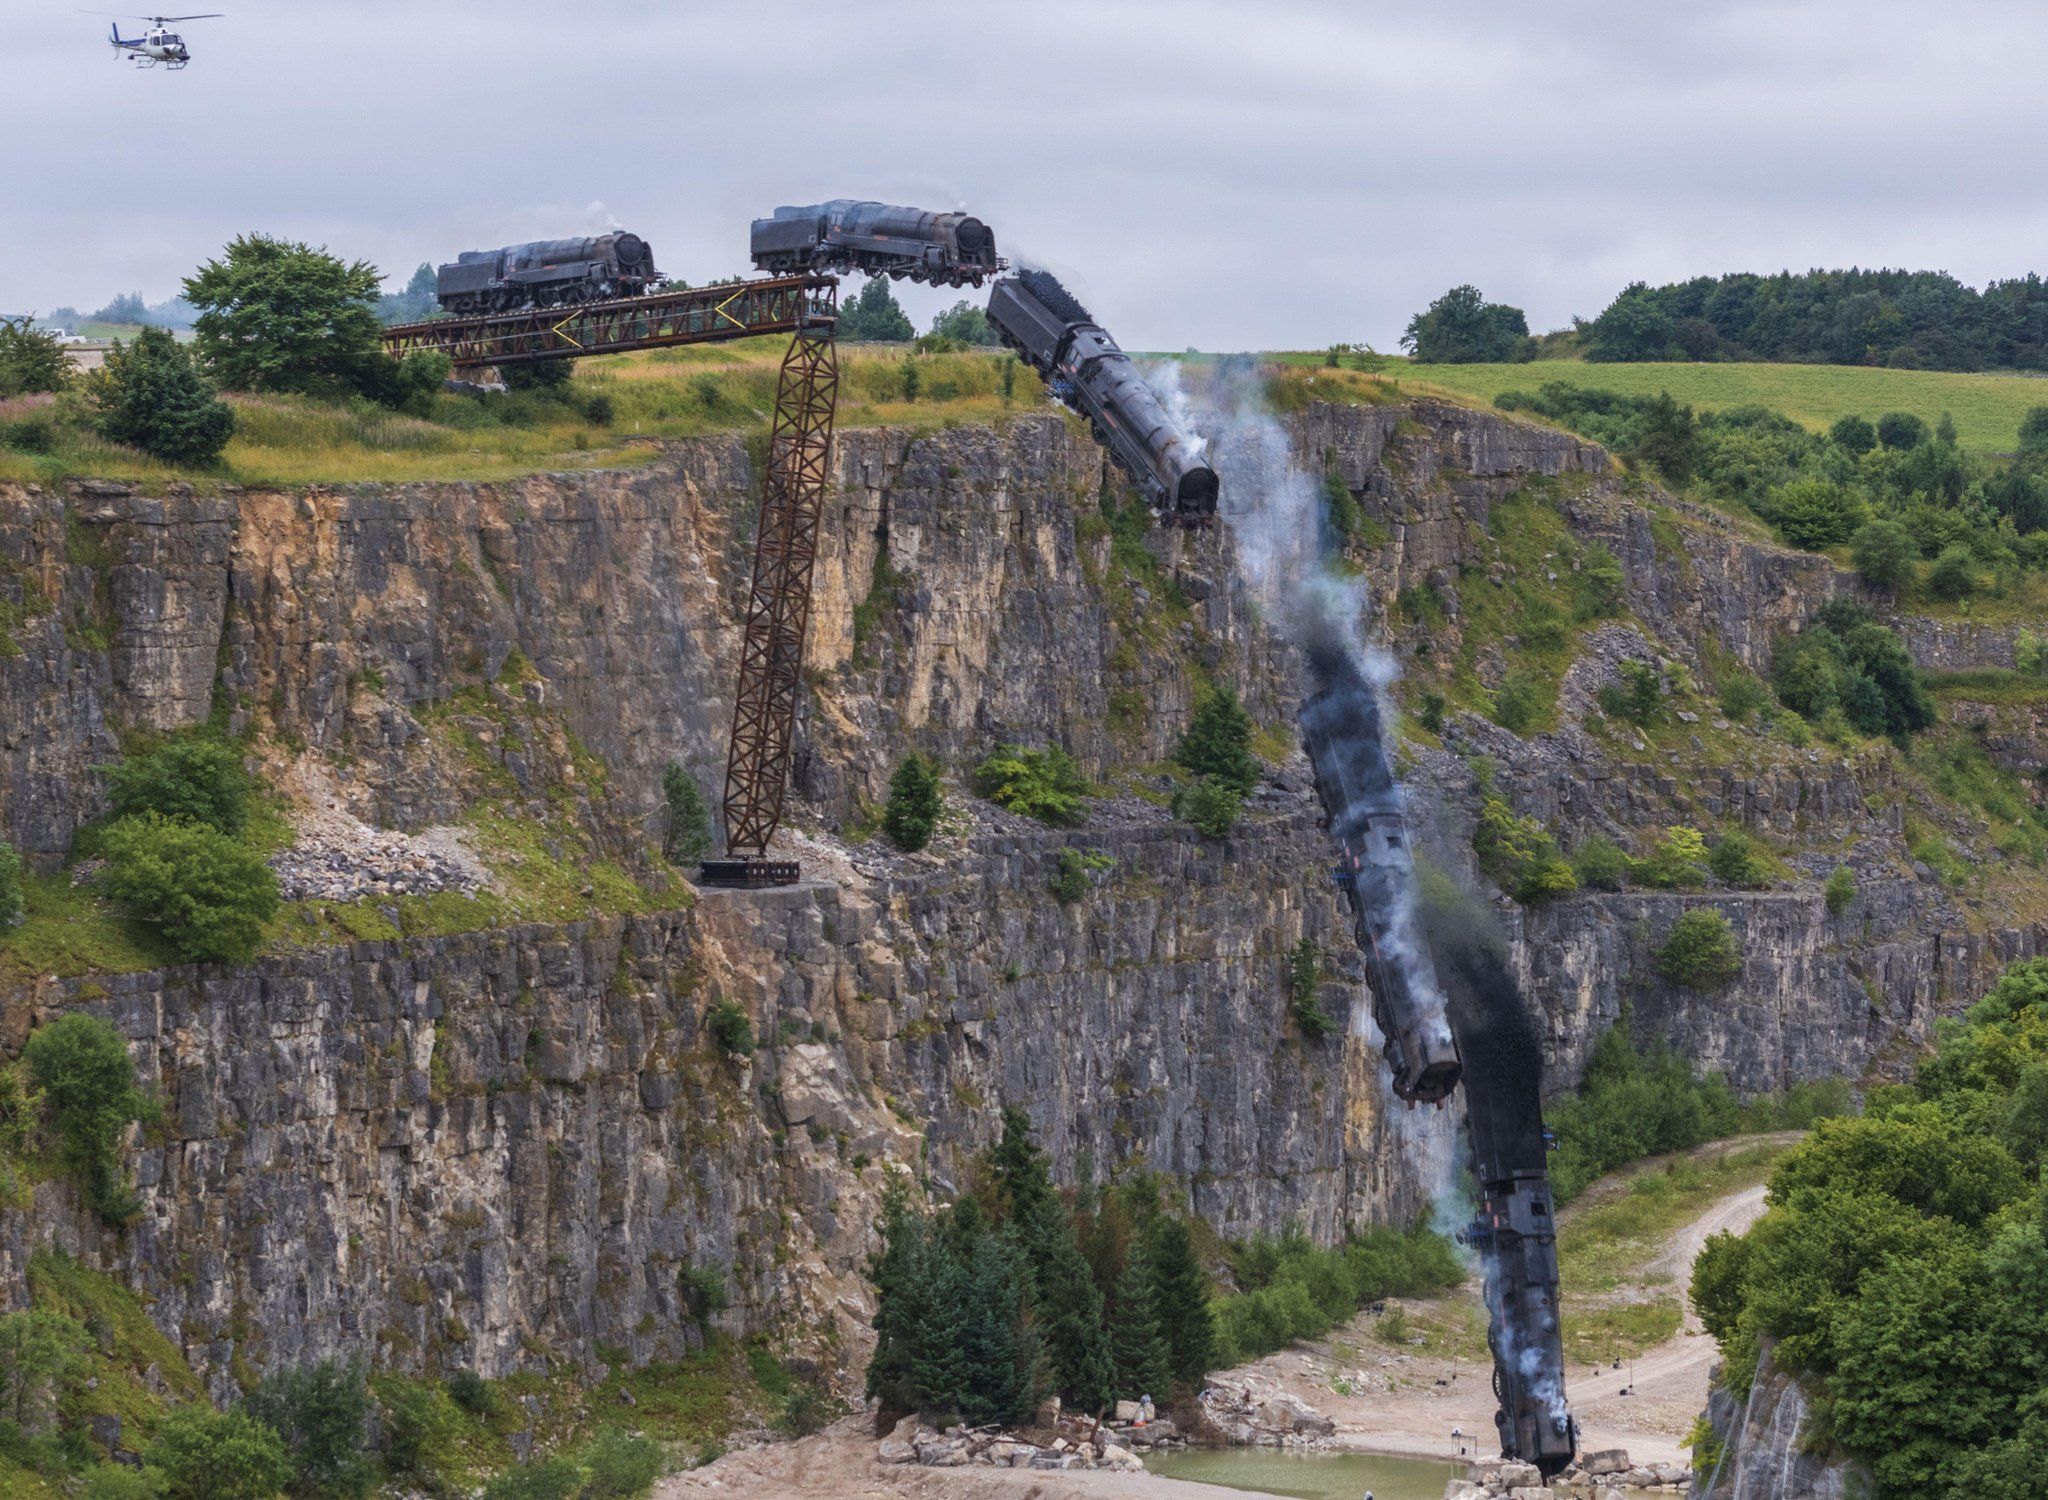 A train plunges down a ravine in North Yorkshire during filming for Mission: Impossible 7